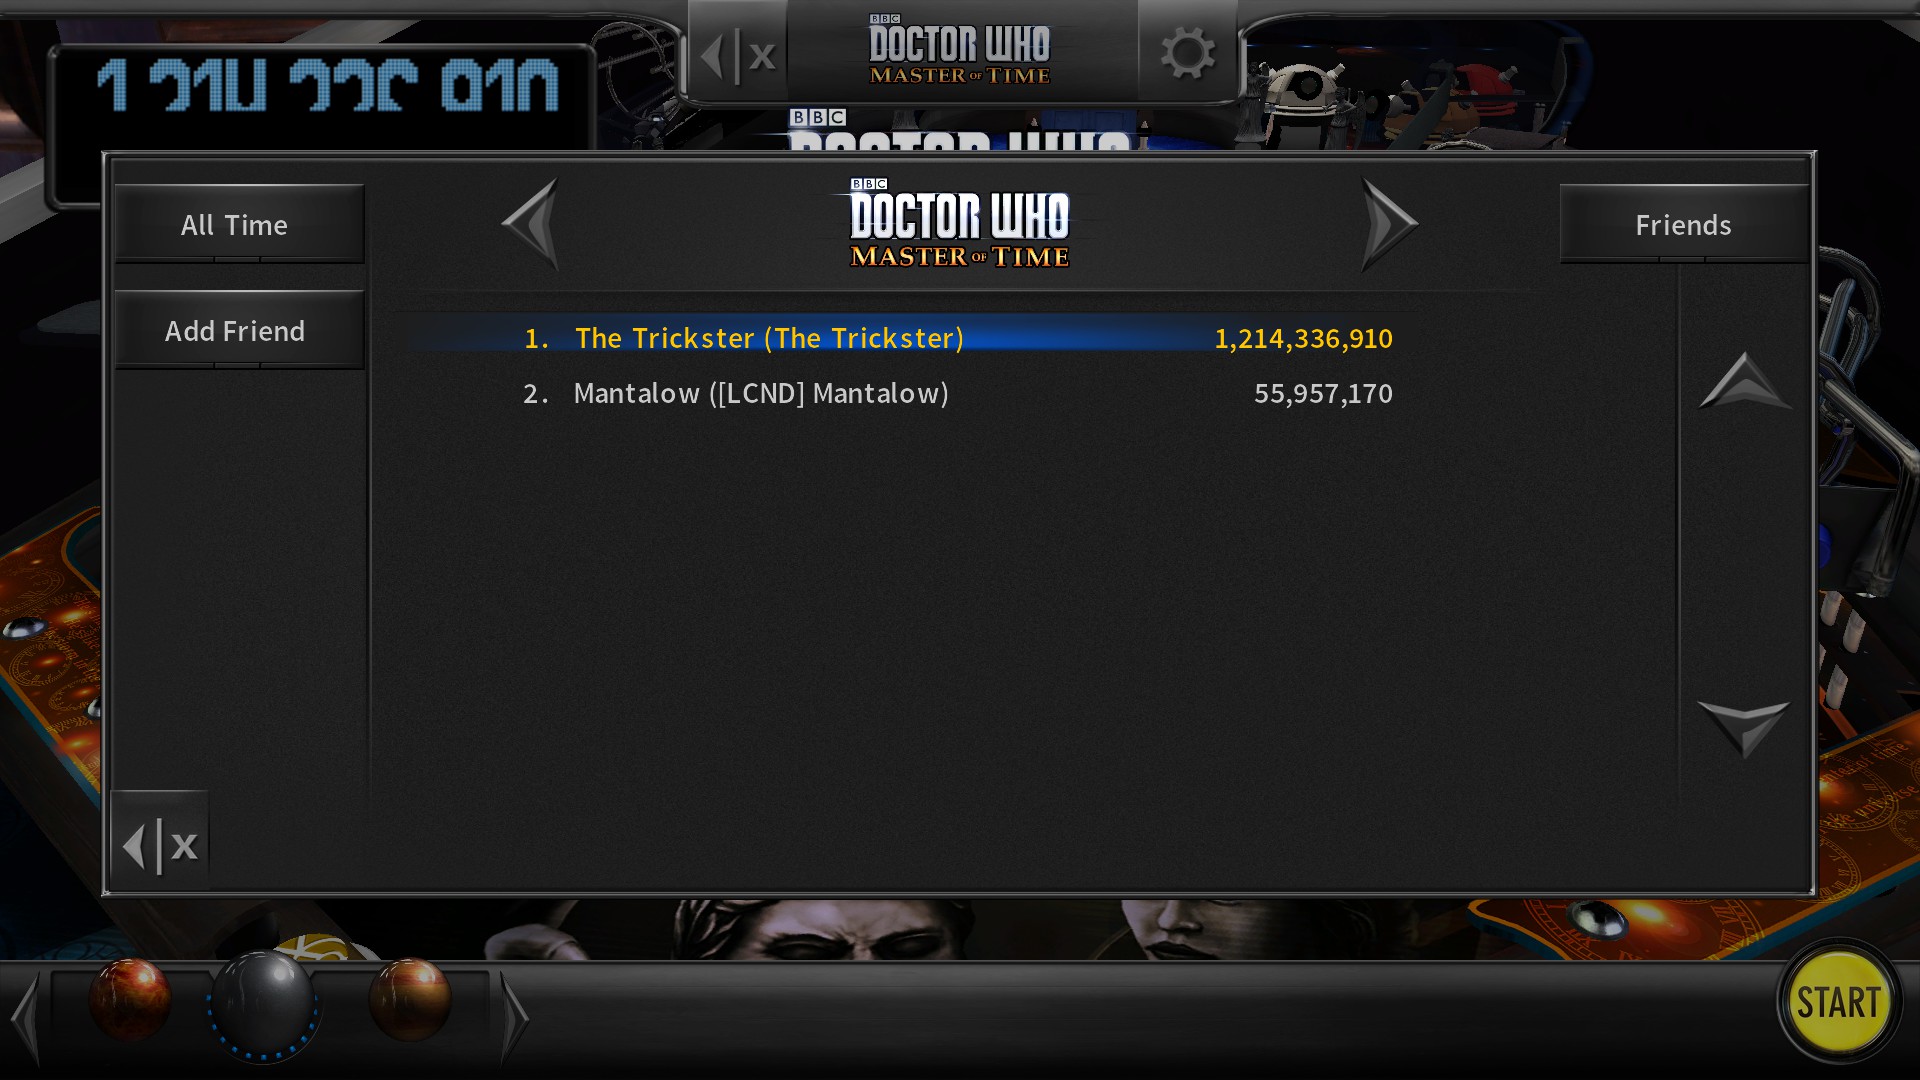 TheTrickster: Pinball Arcade: Doctor Who: Master of Time (PC) 1,214,336,910 points on 2017-03-28 13:44:57